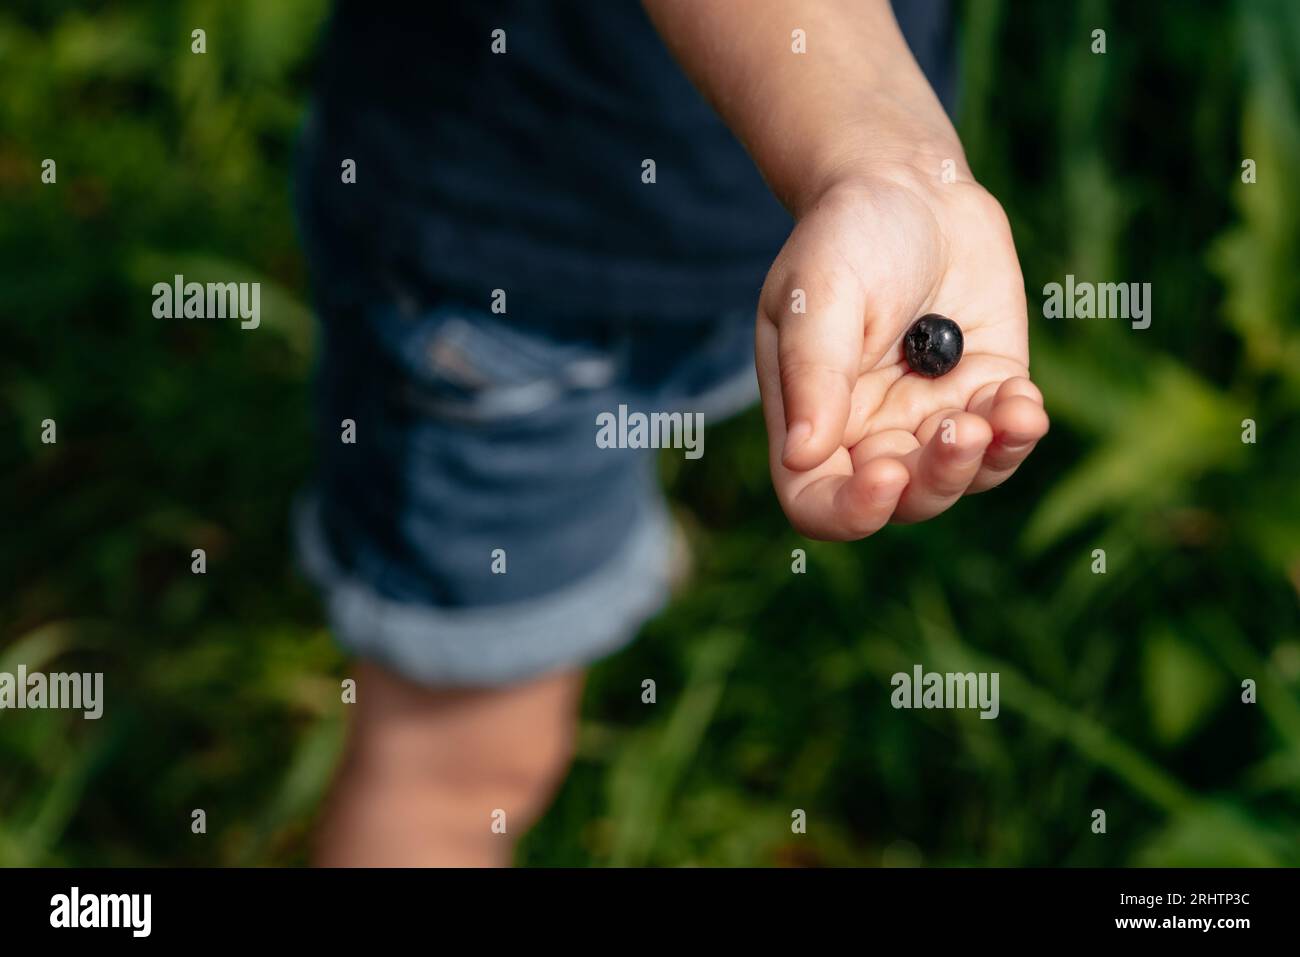 Child standing on grass and holding a single blueberry in it's hand Stock Photo